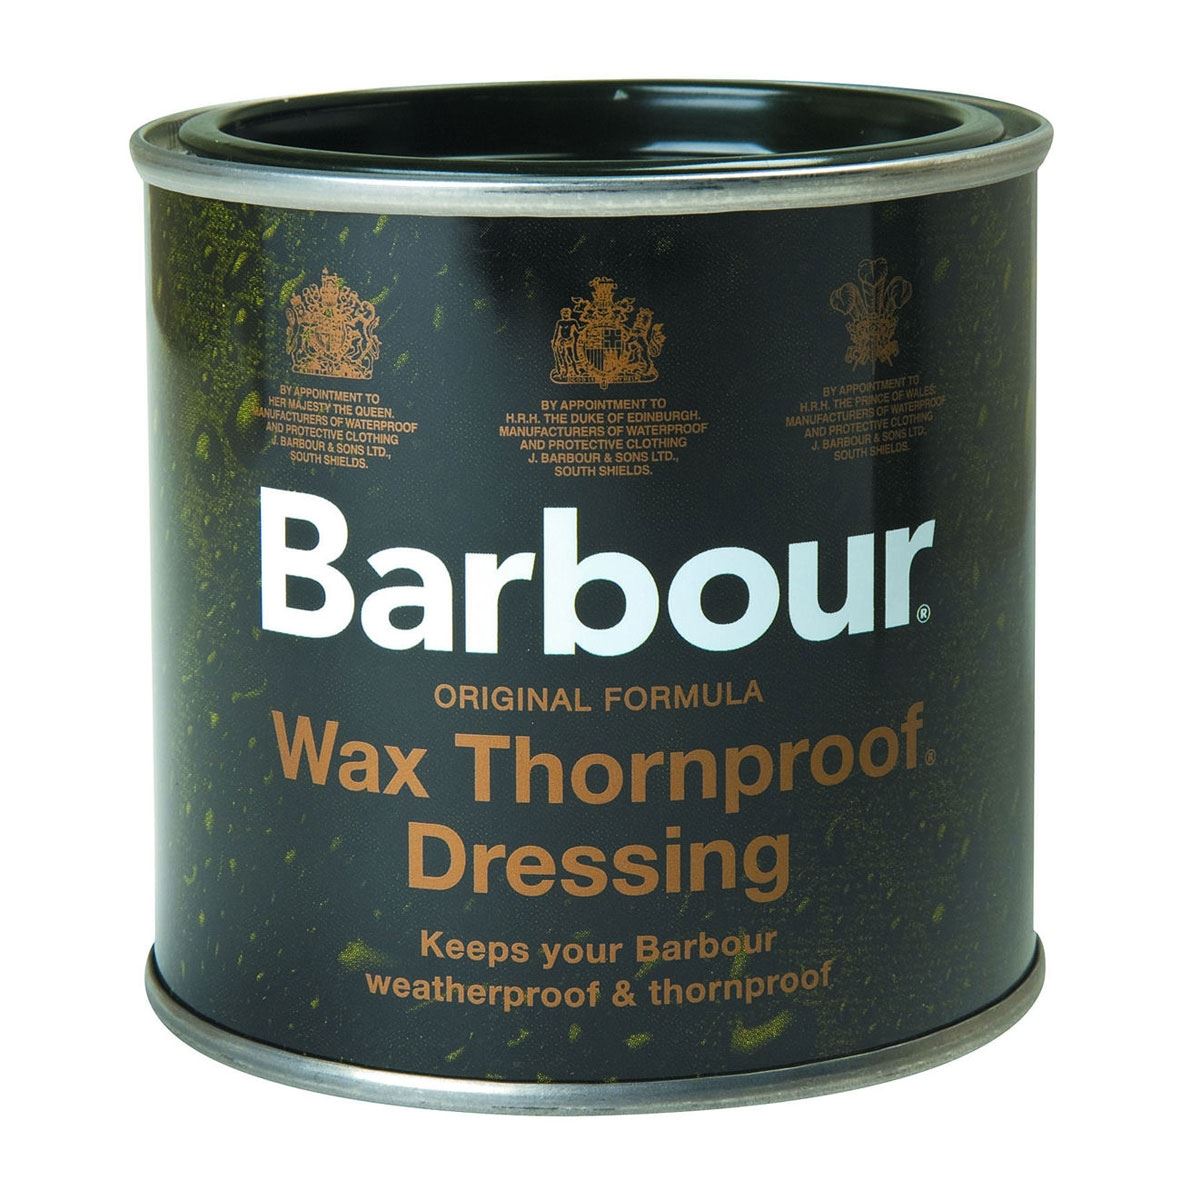 What occurs if customers surpass the barbour wax order limit?